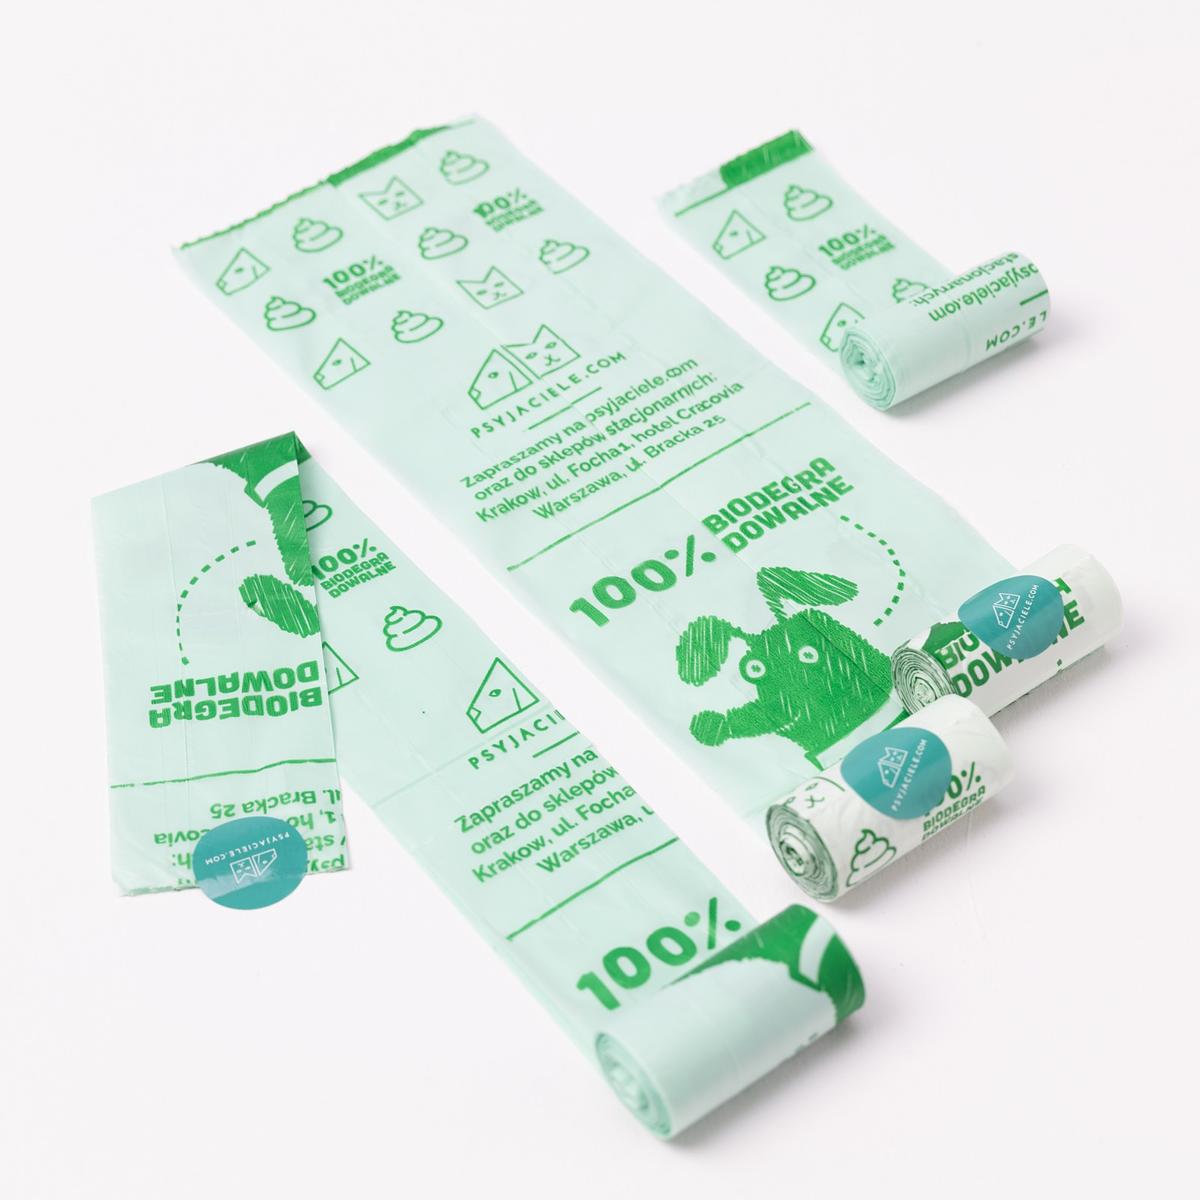 Biodegradable, compostable poop bags